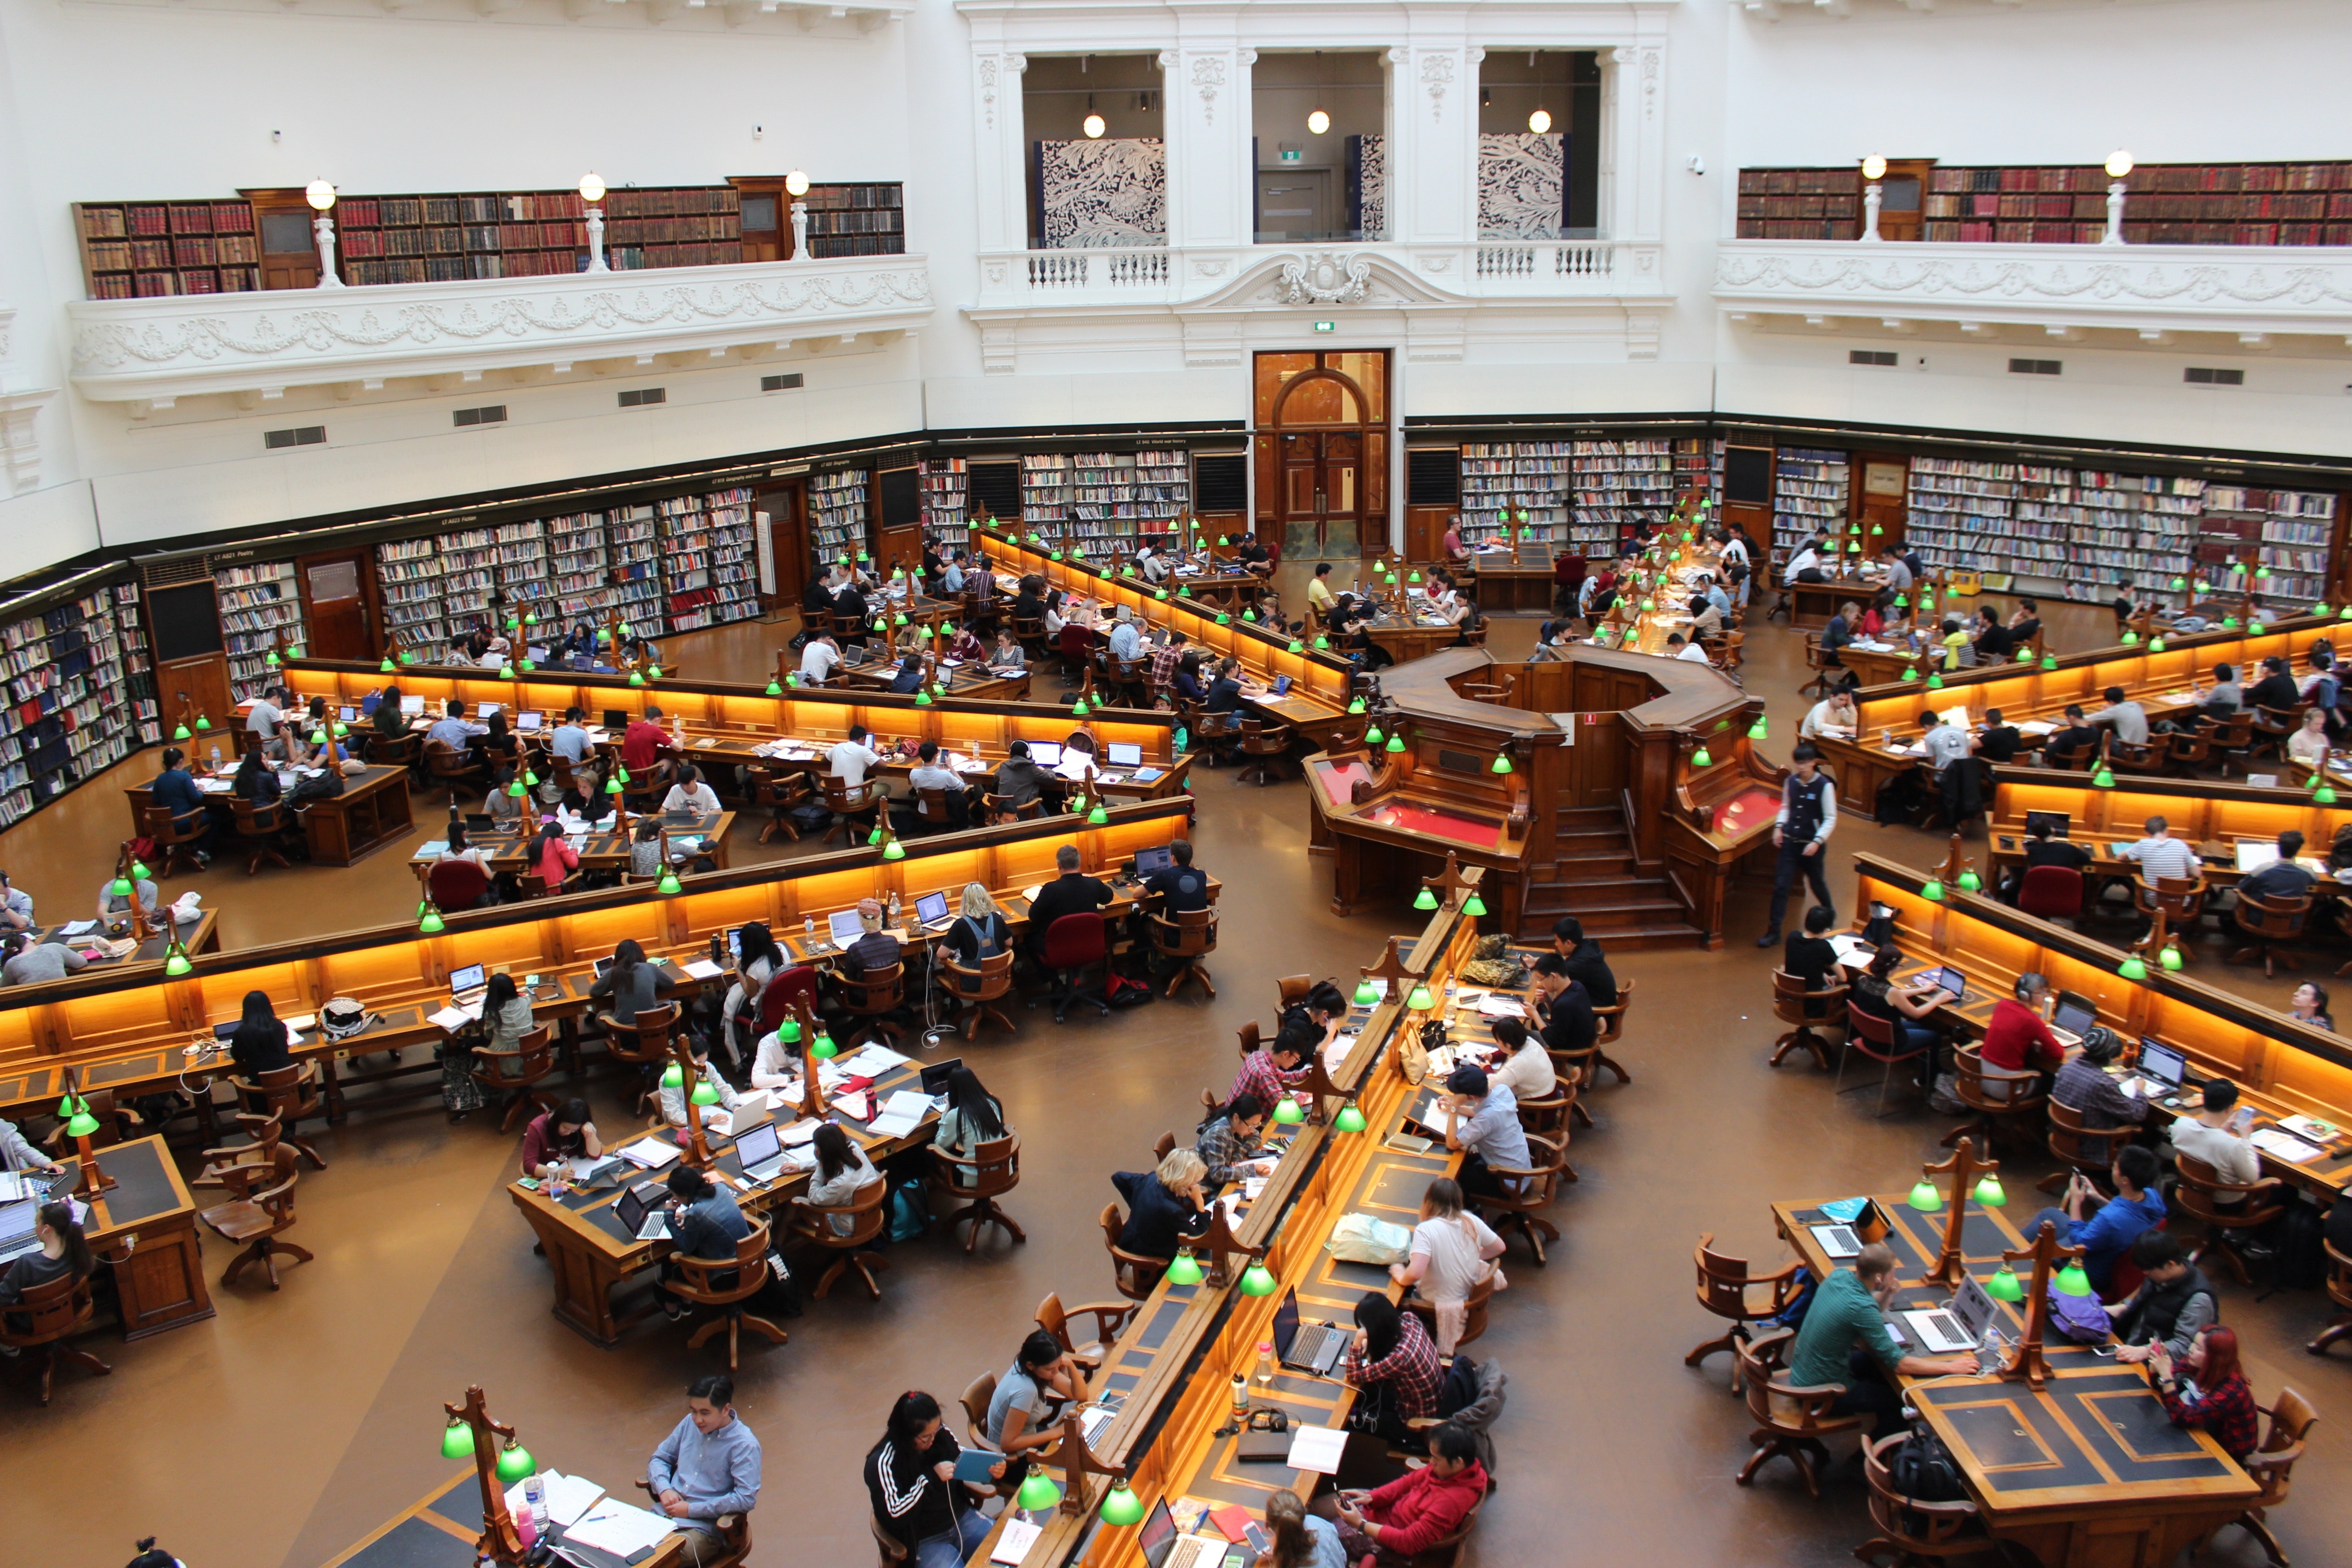 Students studying in a crowded library